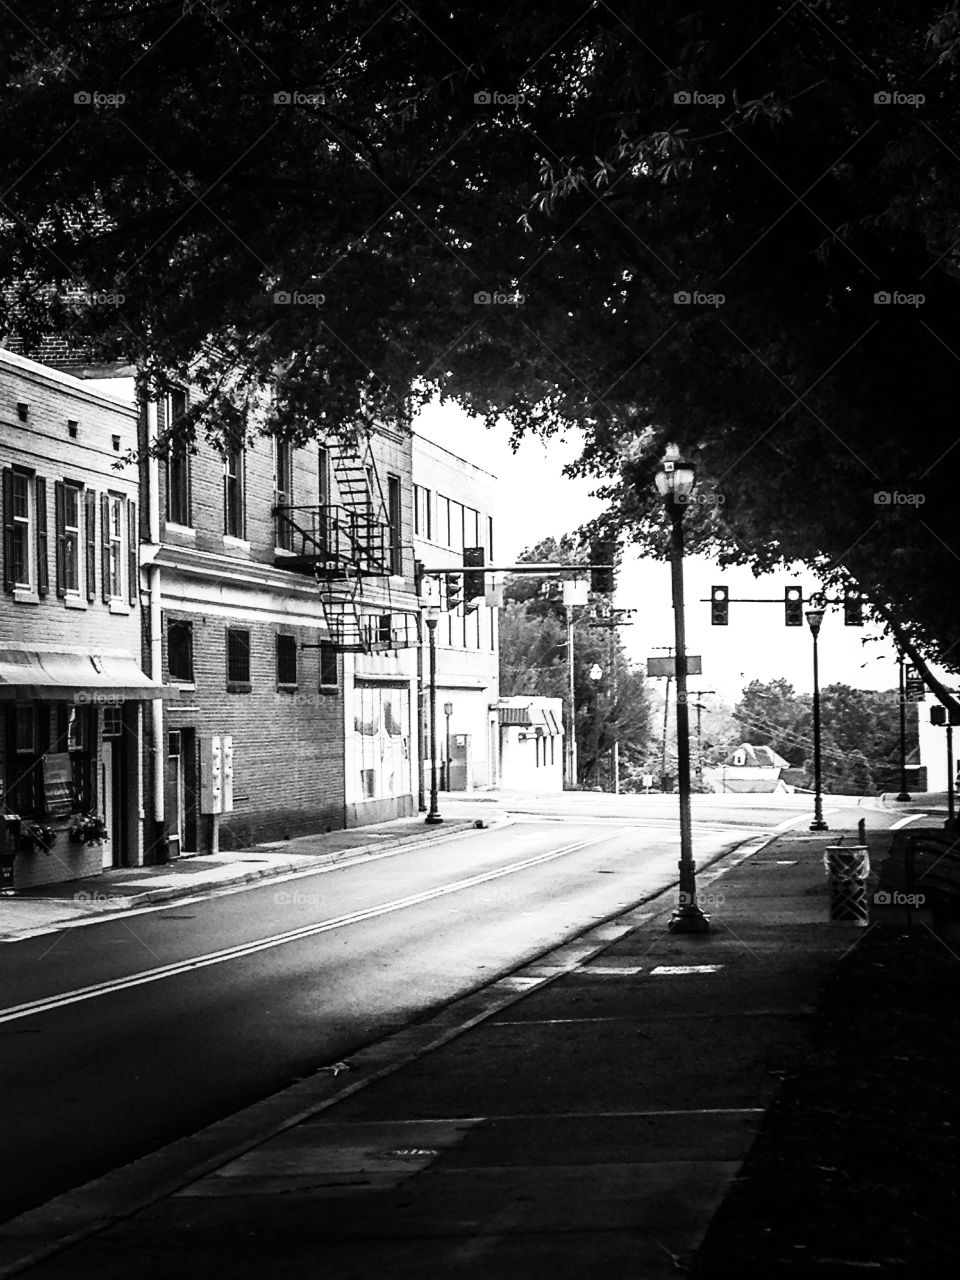 Small town roads in black and white